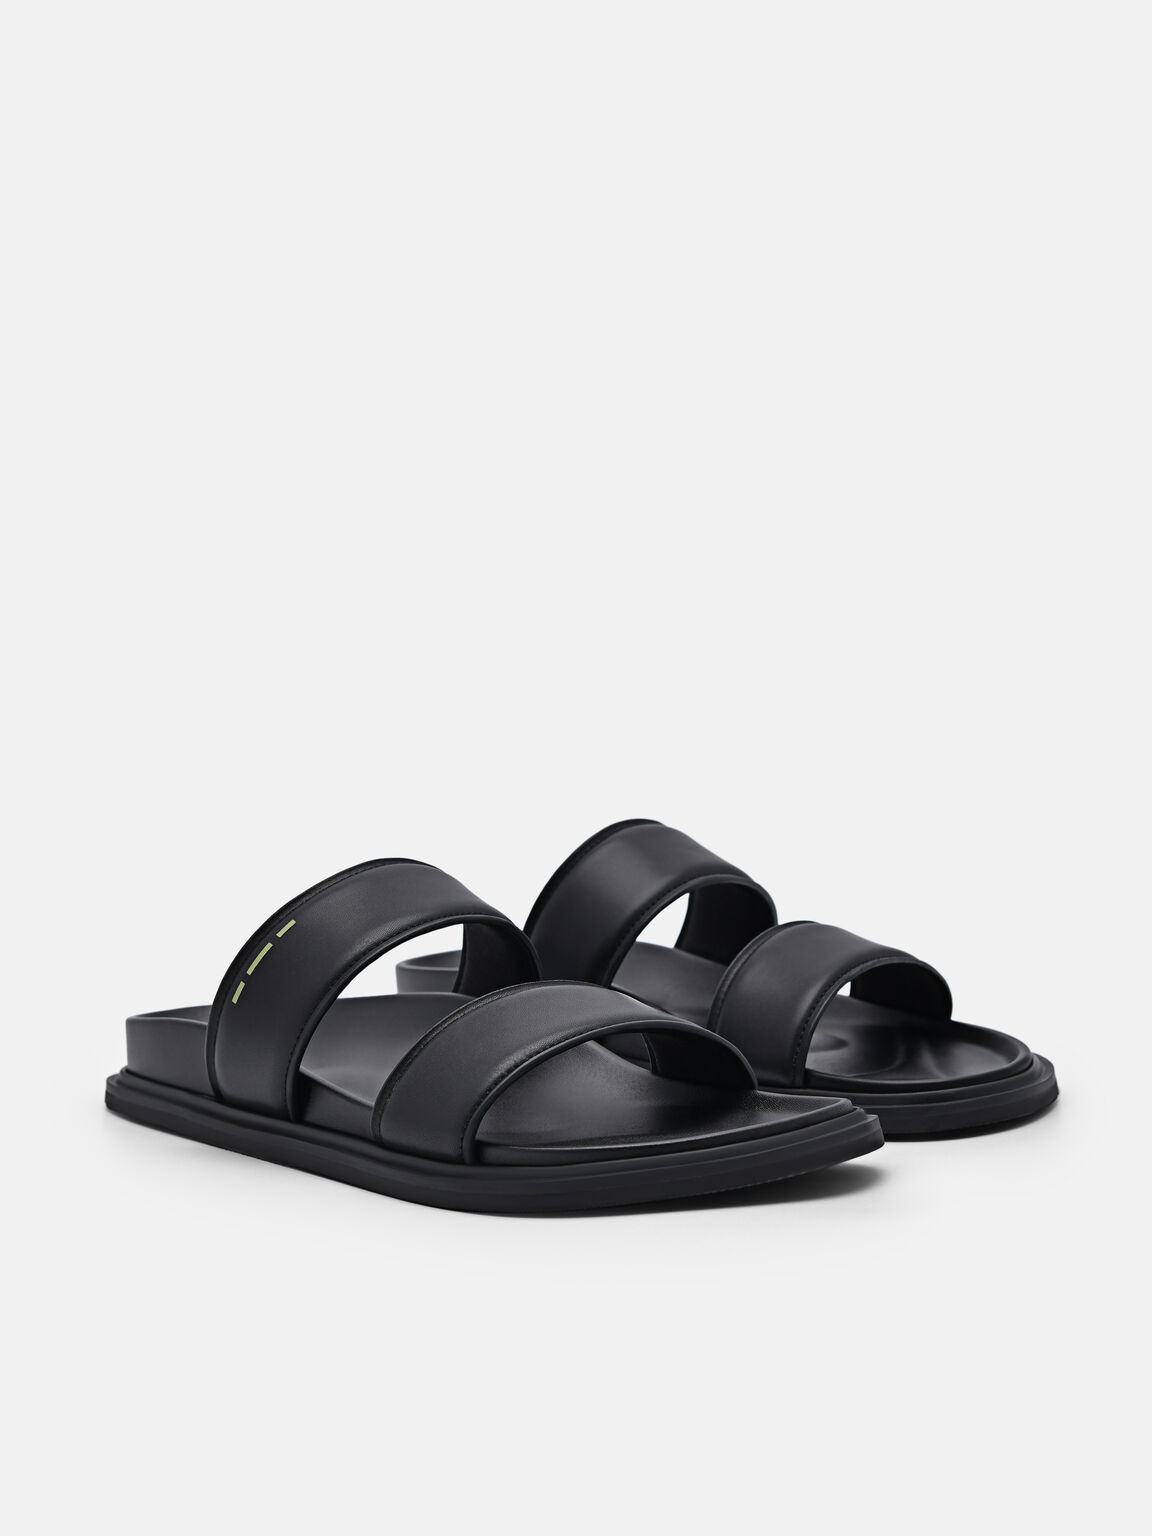 rePEDRO Recycled Leather Slide Sandals, Black